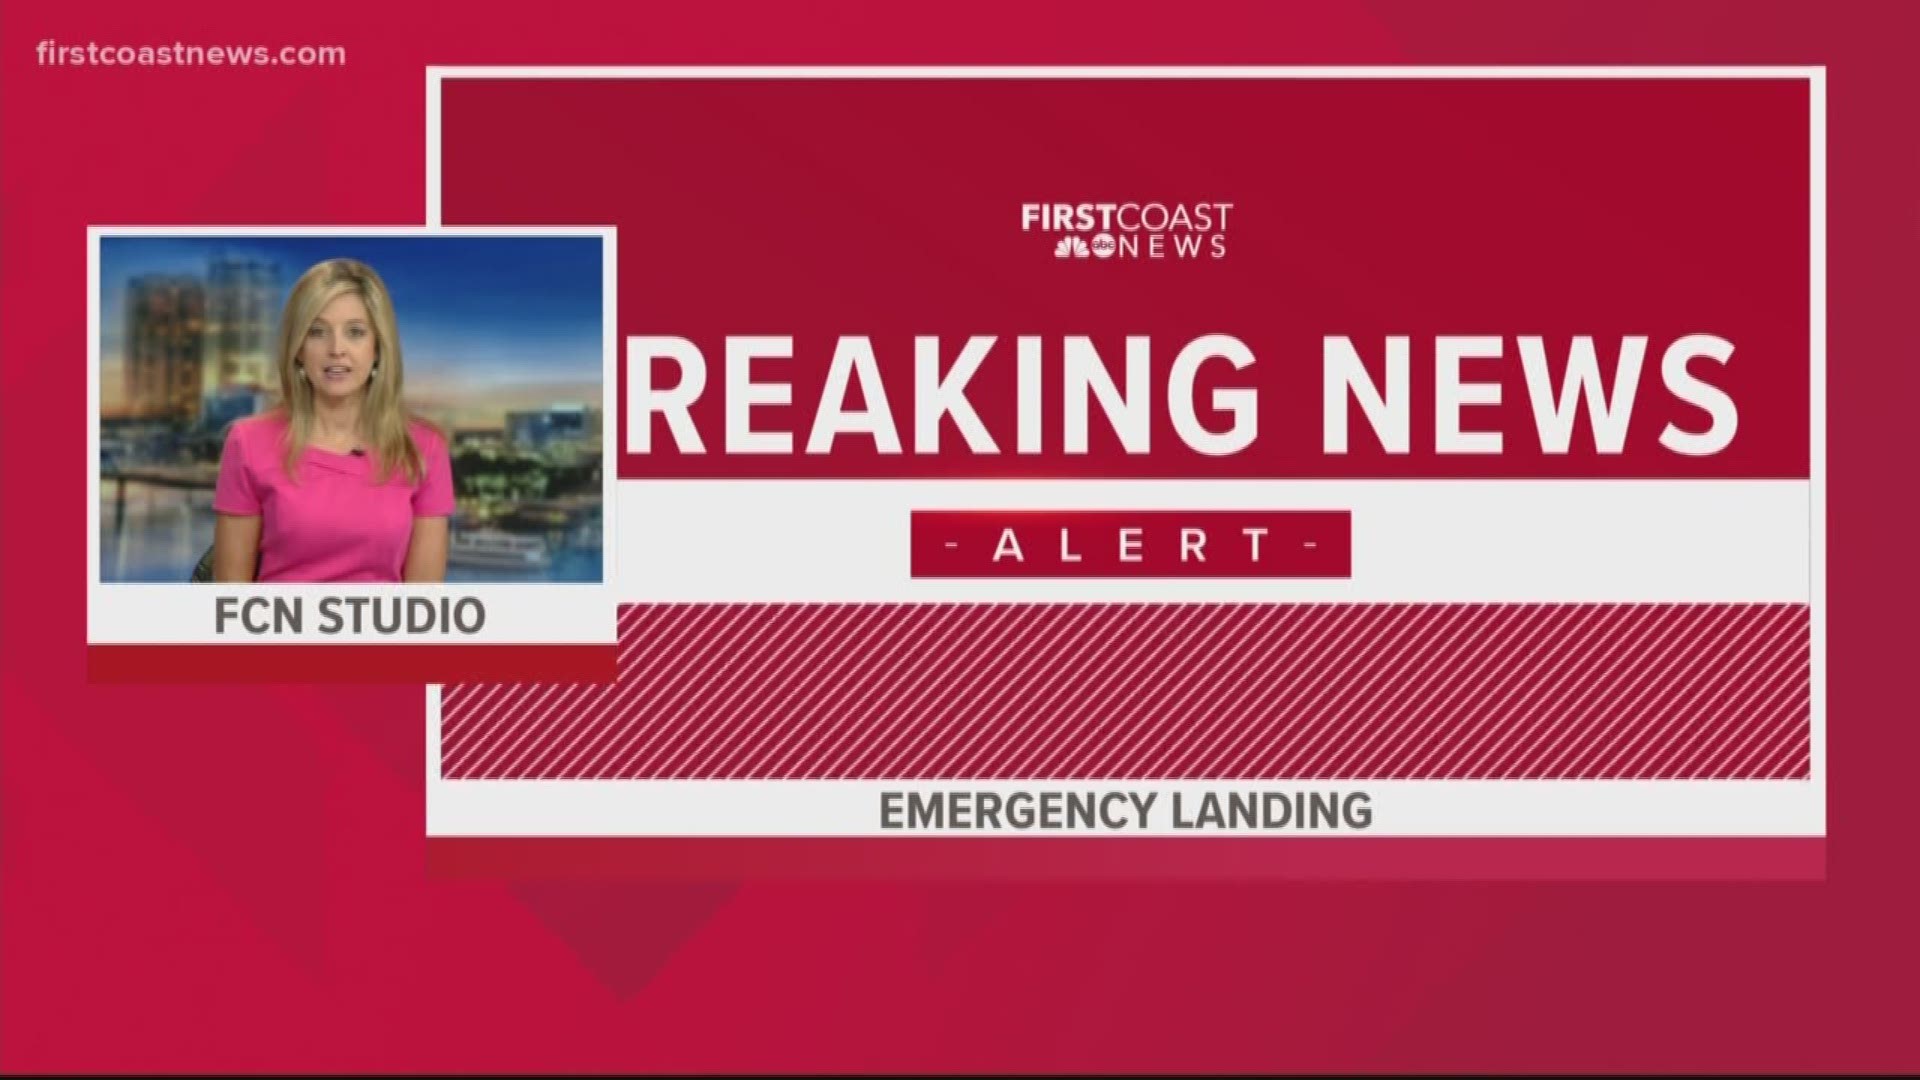 All 38 passengers aboard flight 3798 are OK after the plane made an emergency landing at the Jacksonville International Airport.